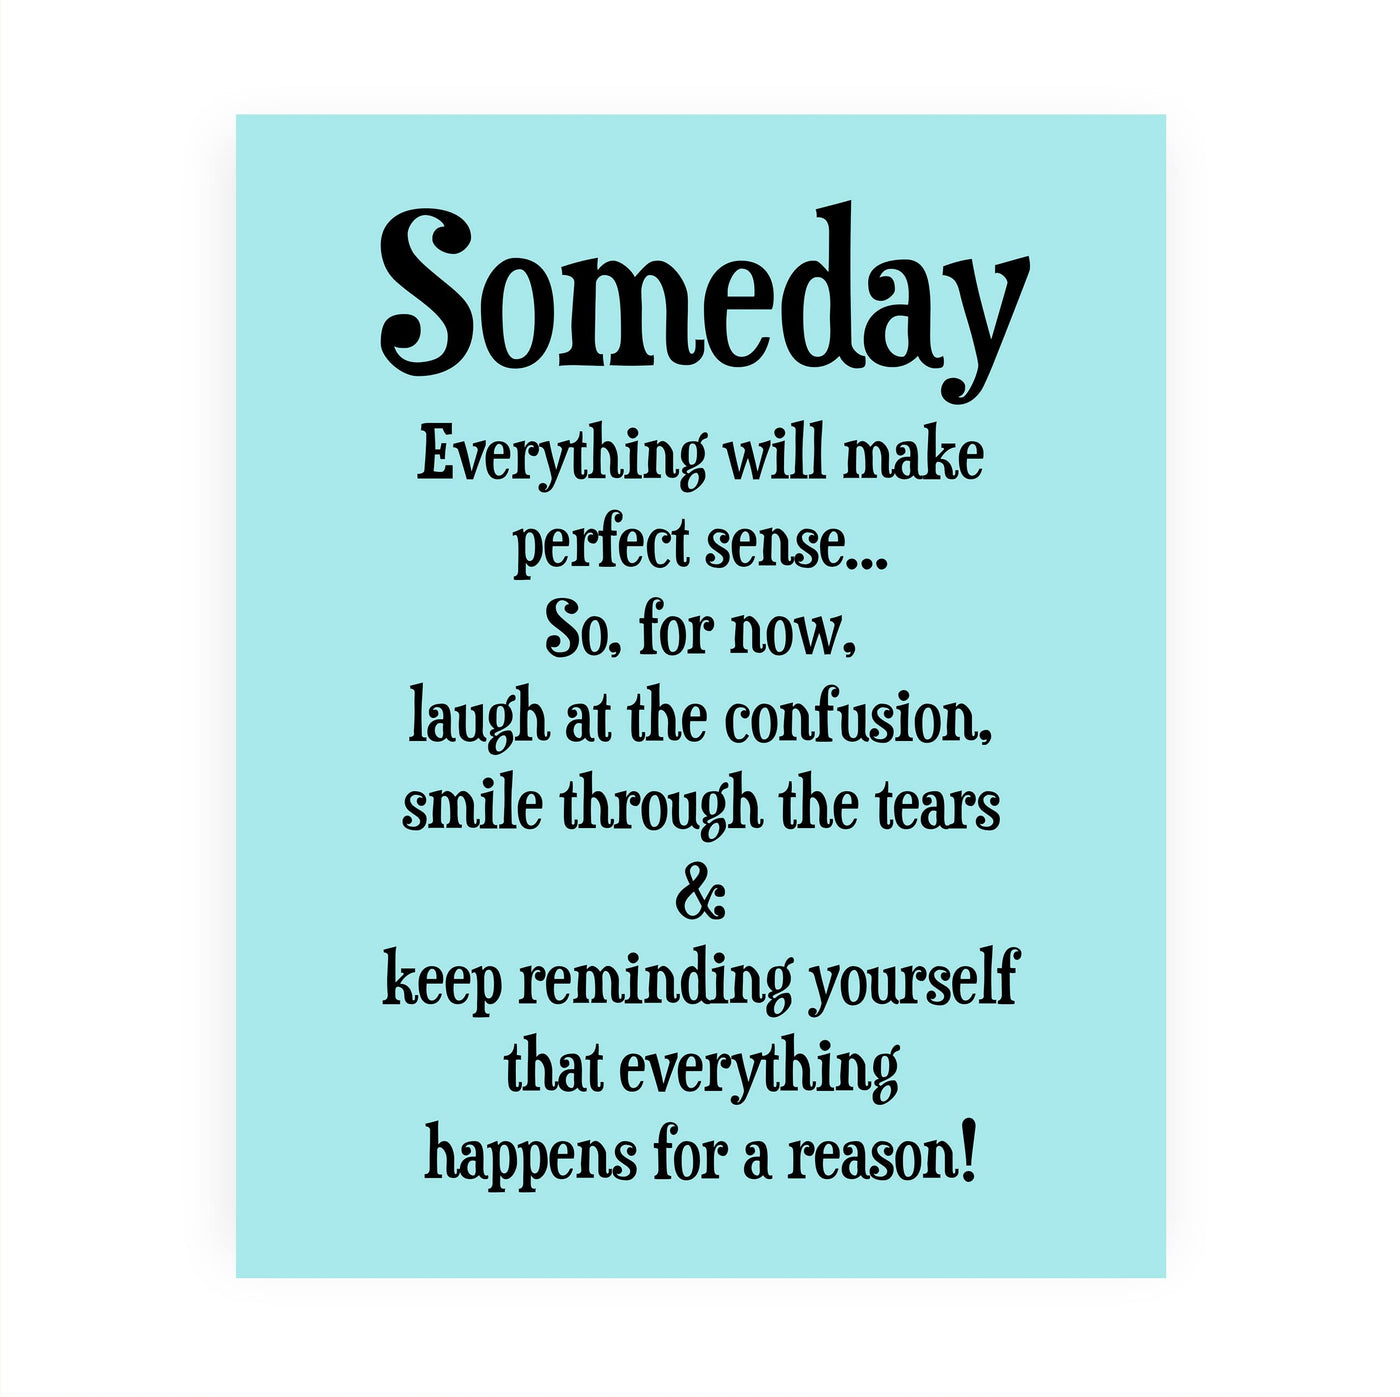 "Someday Everything Will Make Sense" Inspirational Quotes Wall Decor Sign -8 x 10" Motivational Art Print -Ready to Frame. Positive Home-Office-Classroom-Teen-Dorm Decor. Great Gift!